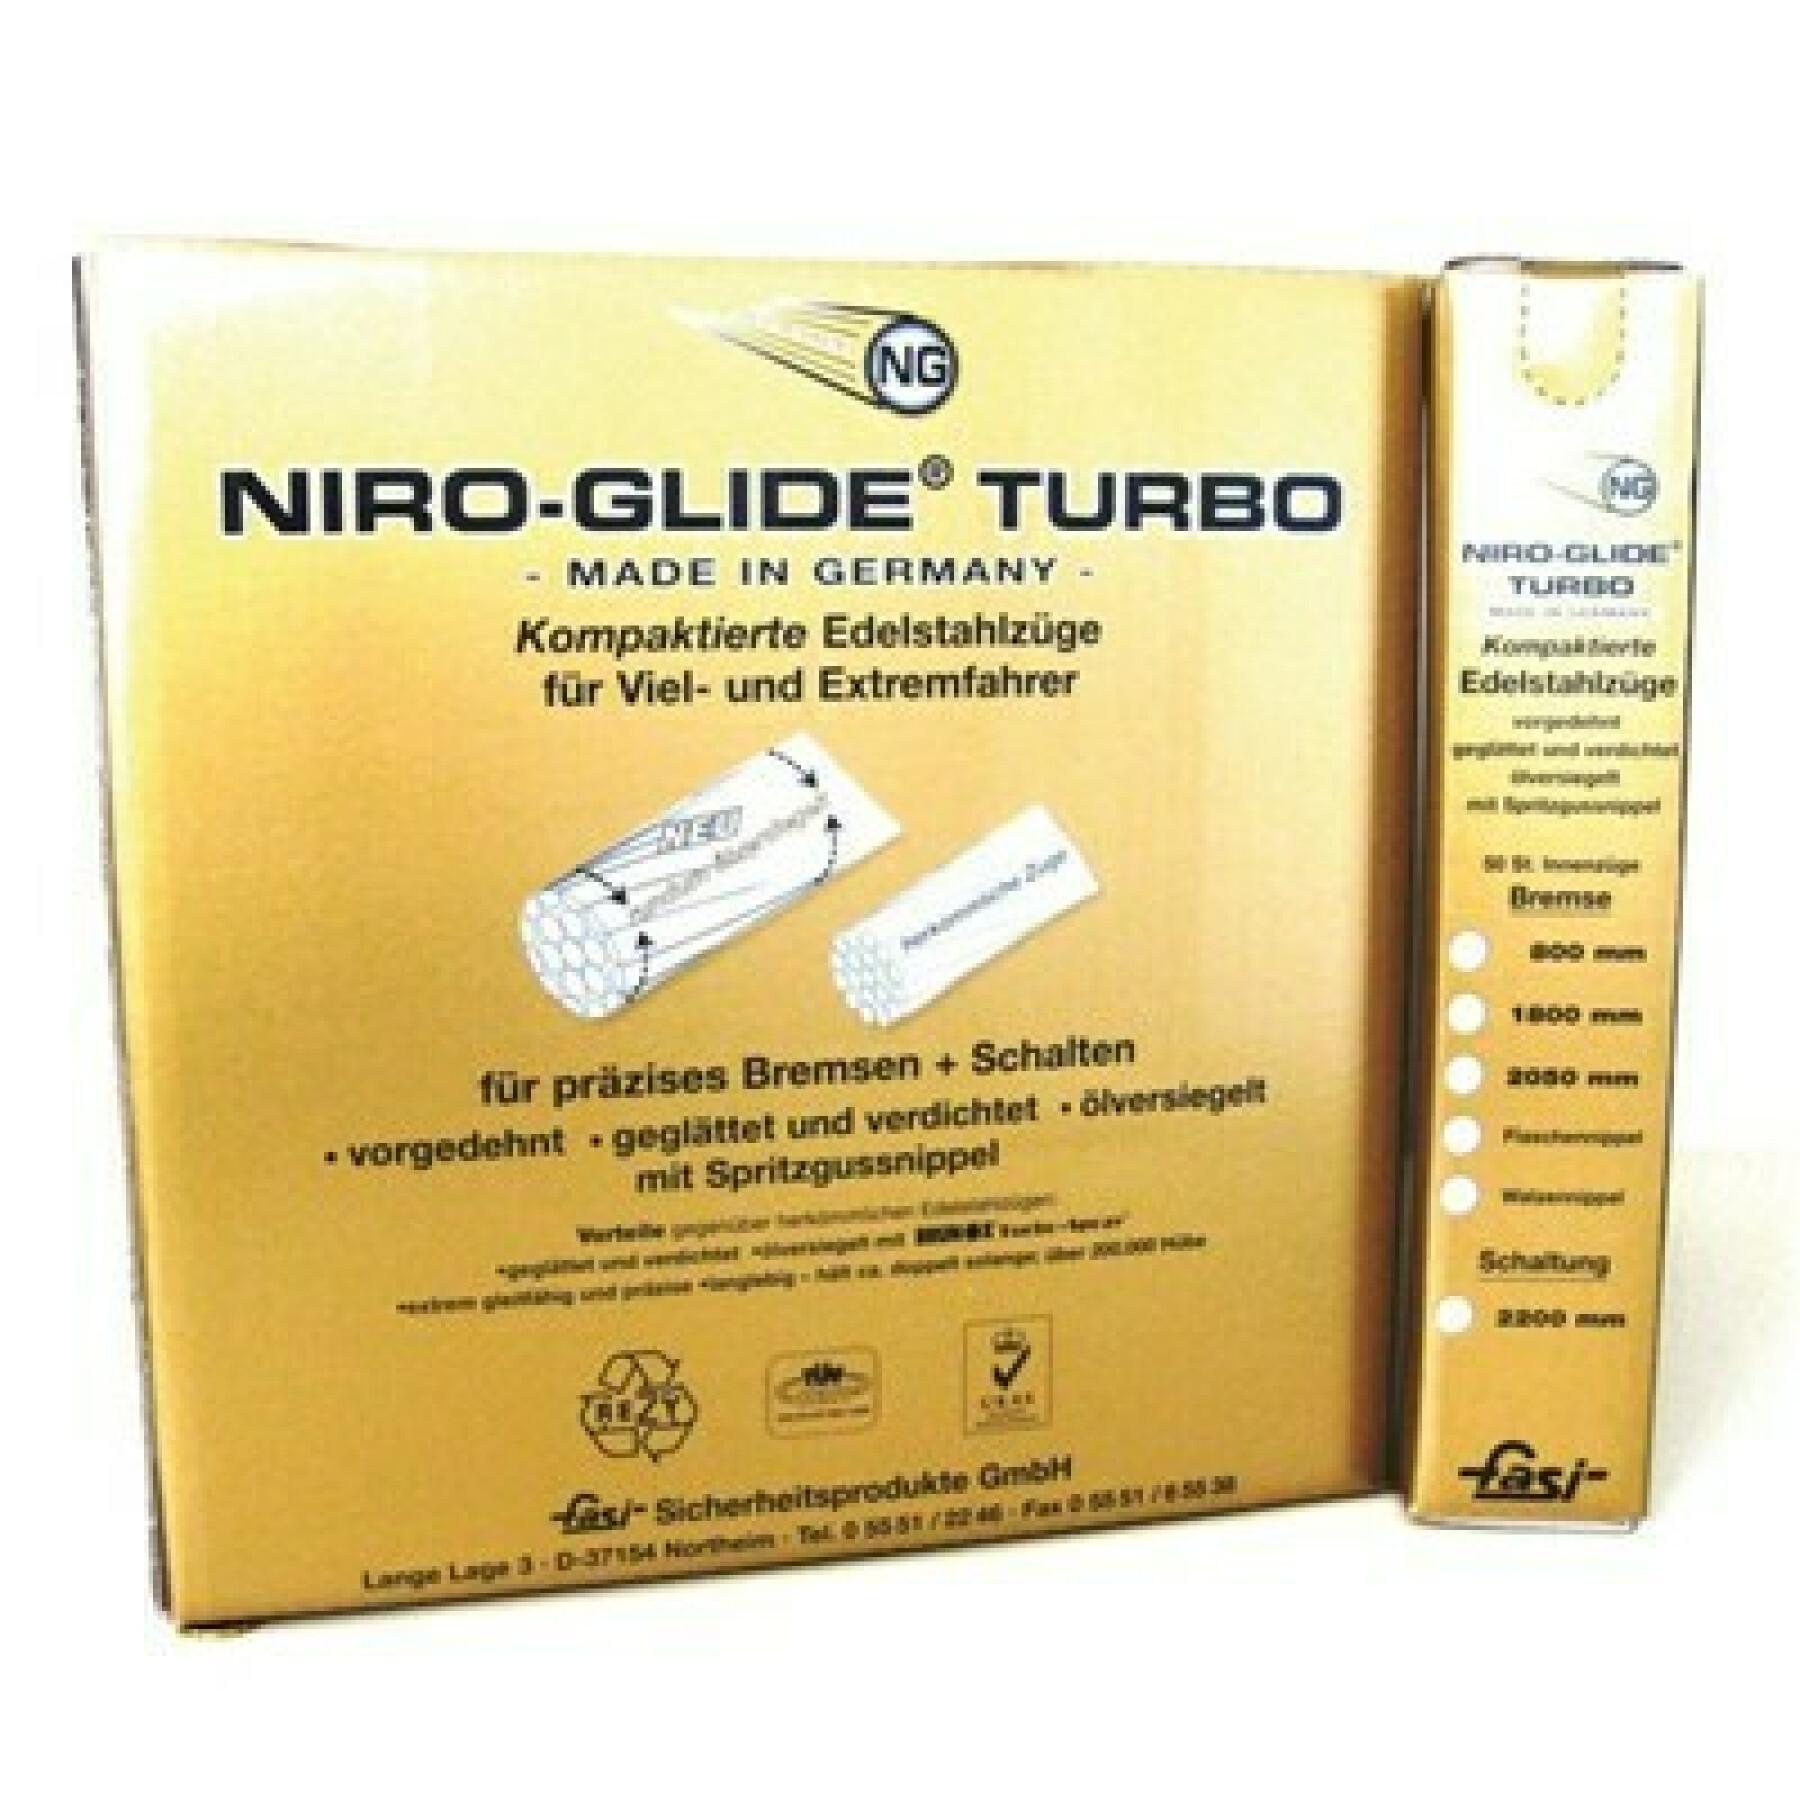 Box of 50 stainless steel brake cables Fasi Niro Glide Turbo 2050 Mmx1.5 mm